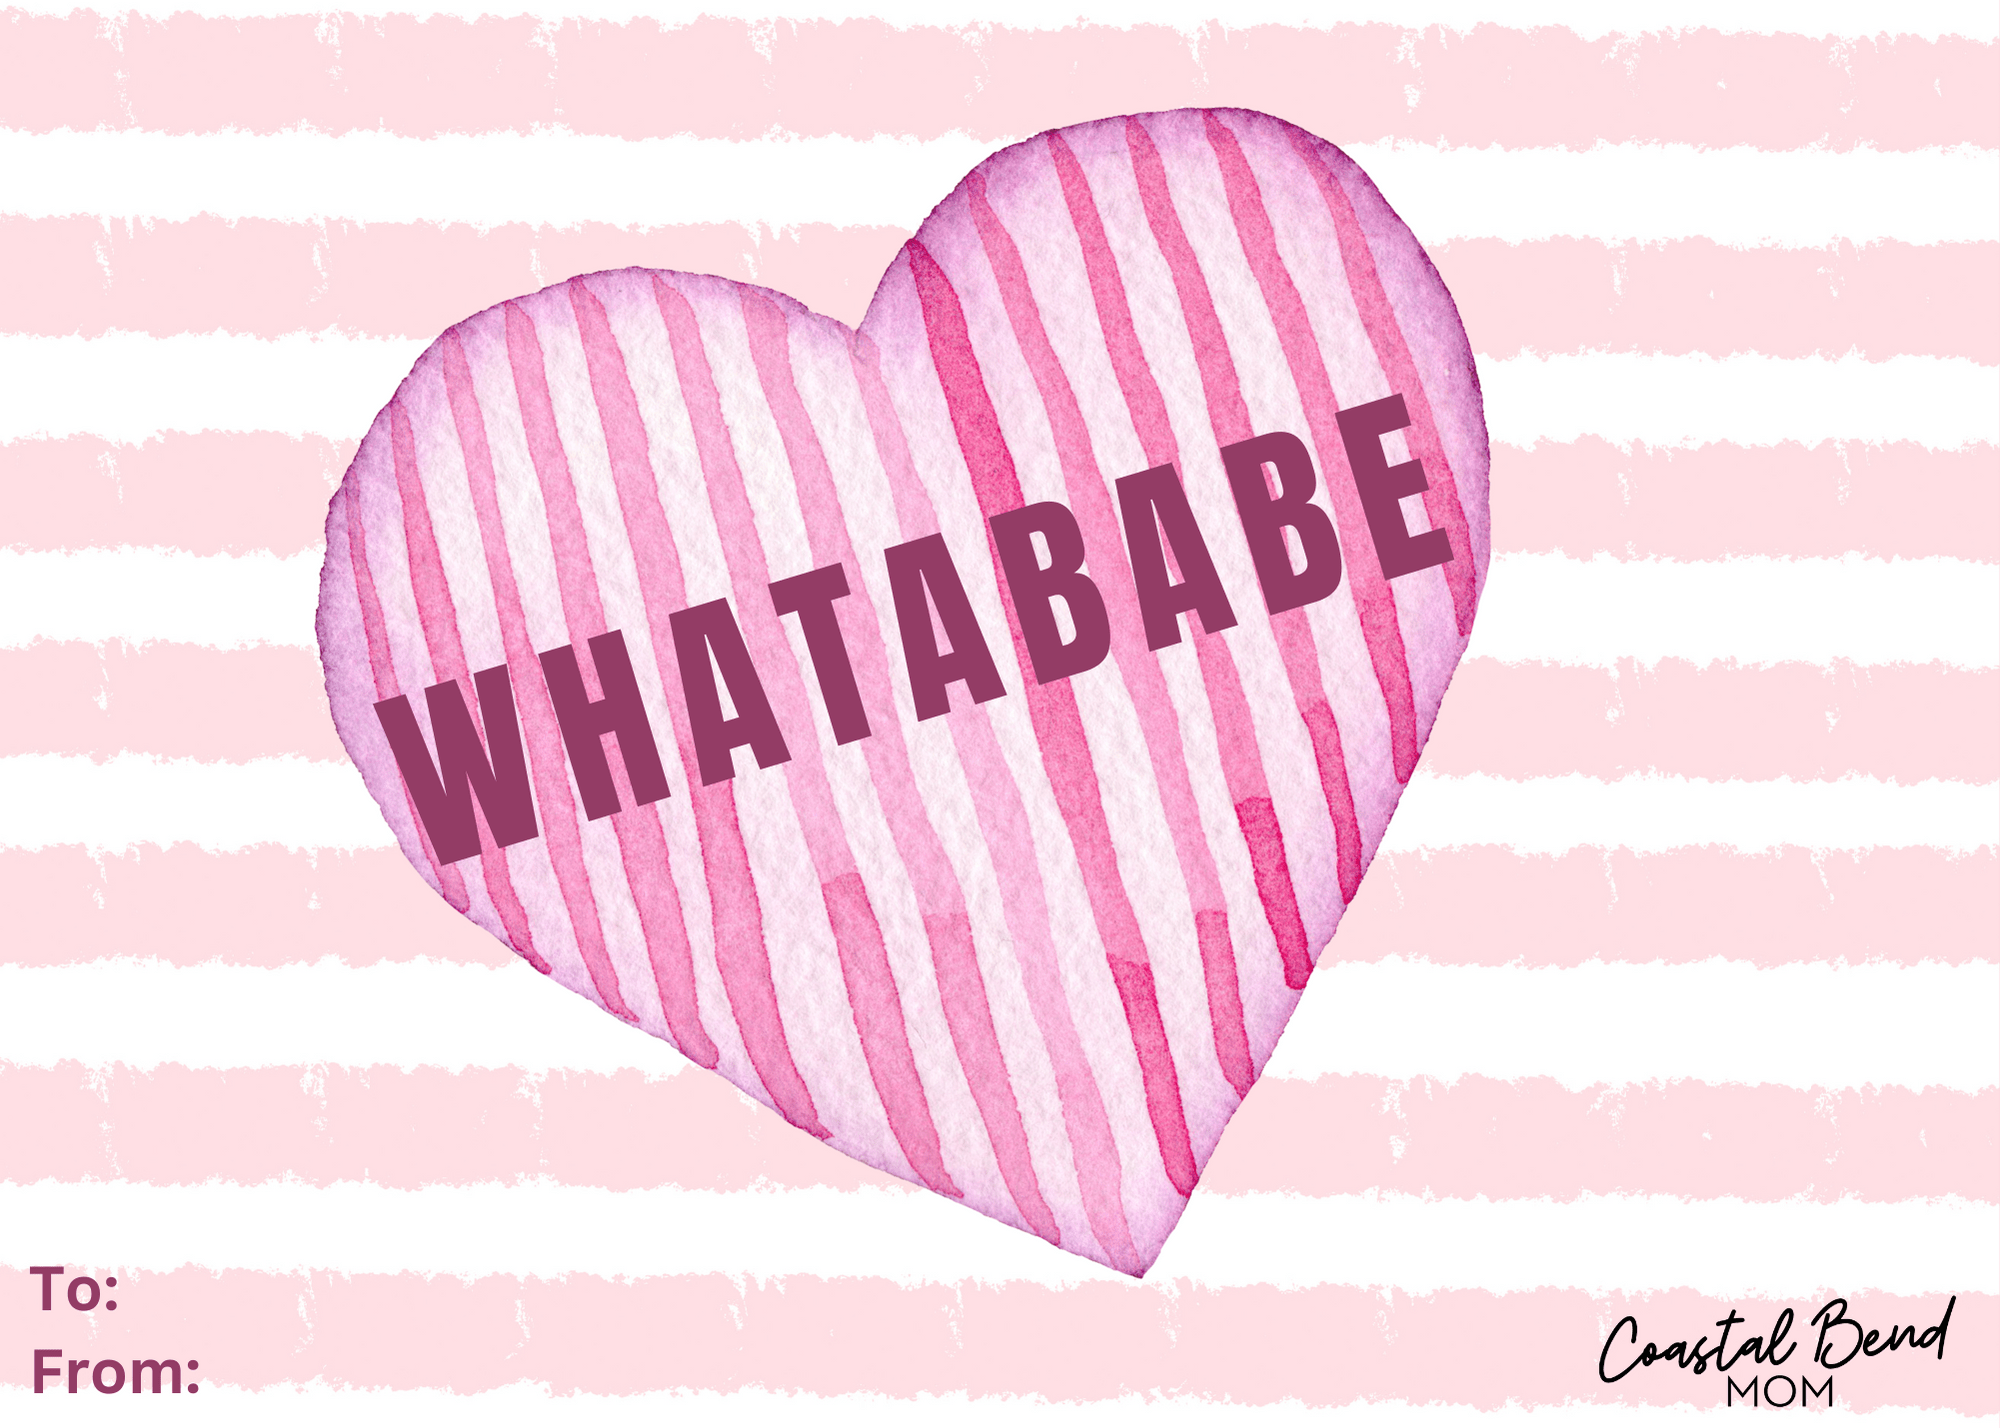 Printable Punny Valentine Card : Reads Whatababe